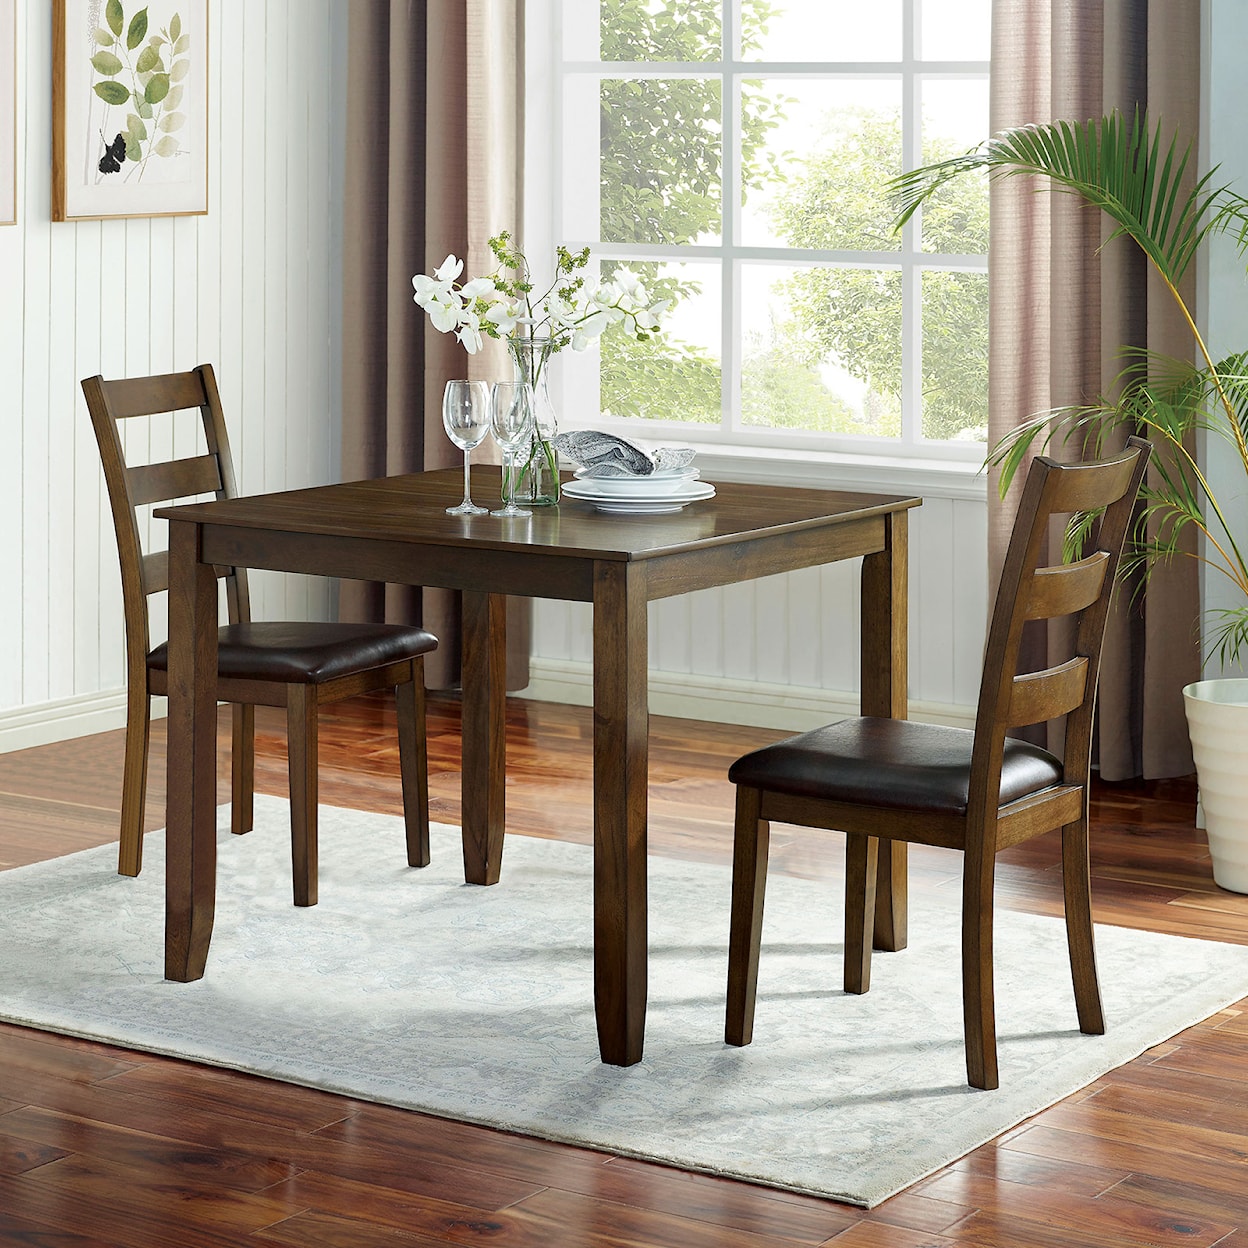 FUSA Gracefield 3 Pc. Dining Table Set